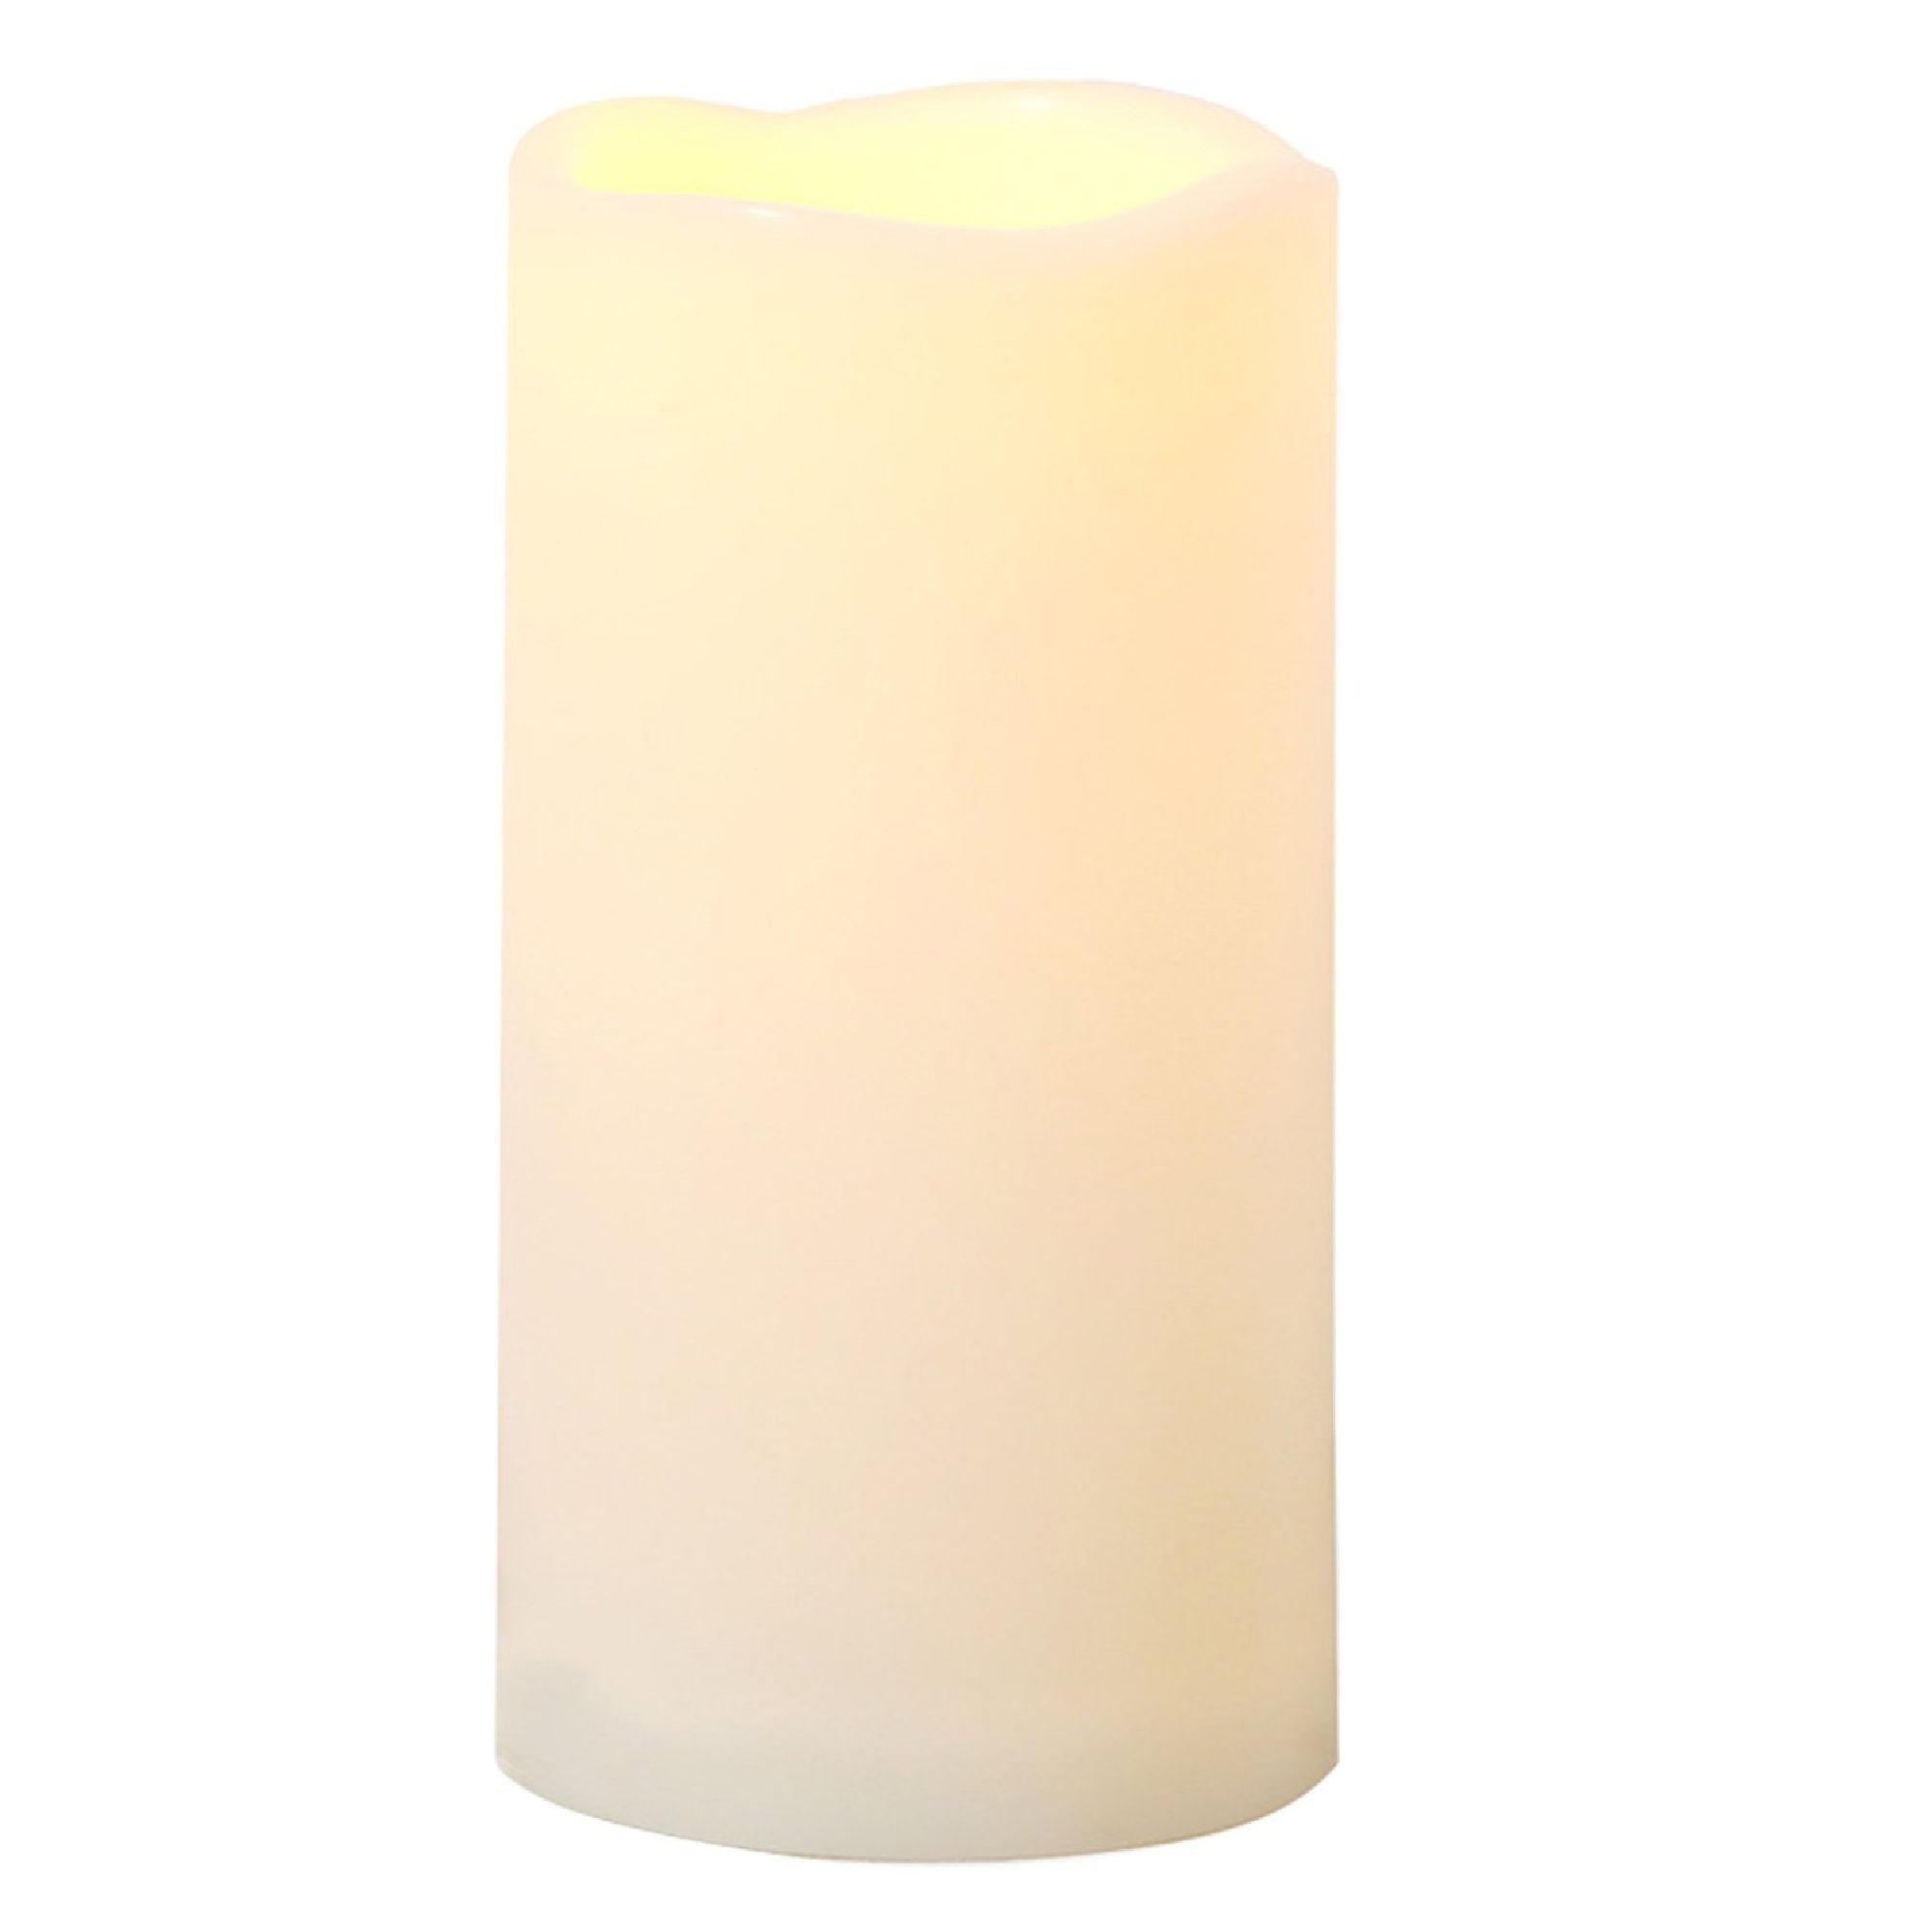 Flickering Flameless Resin Pillar LED Candle Lights Battery Operated Home/Party 